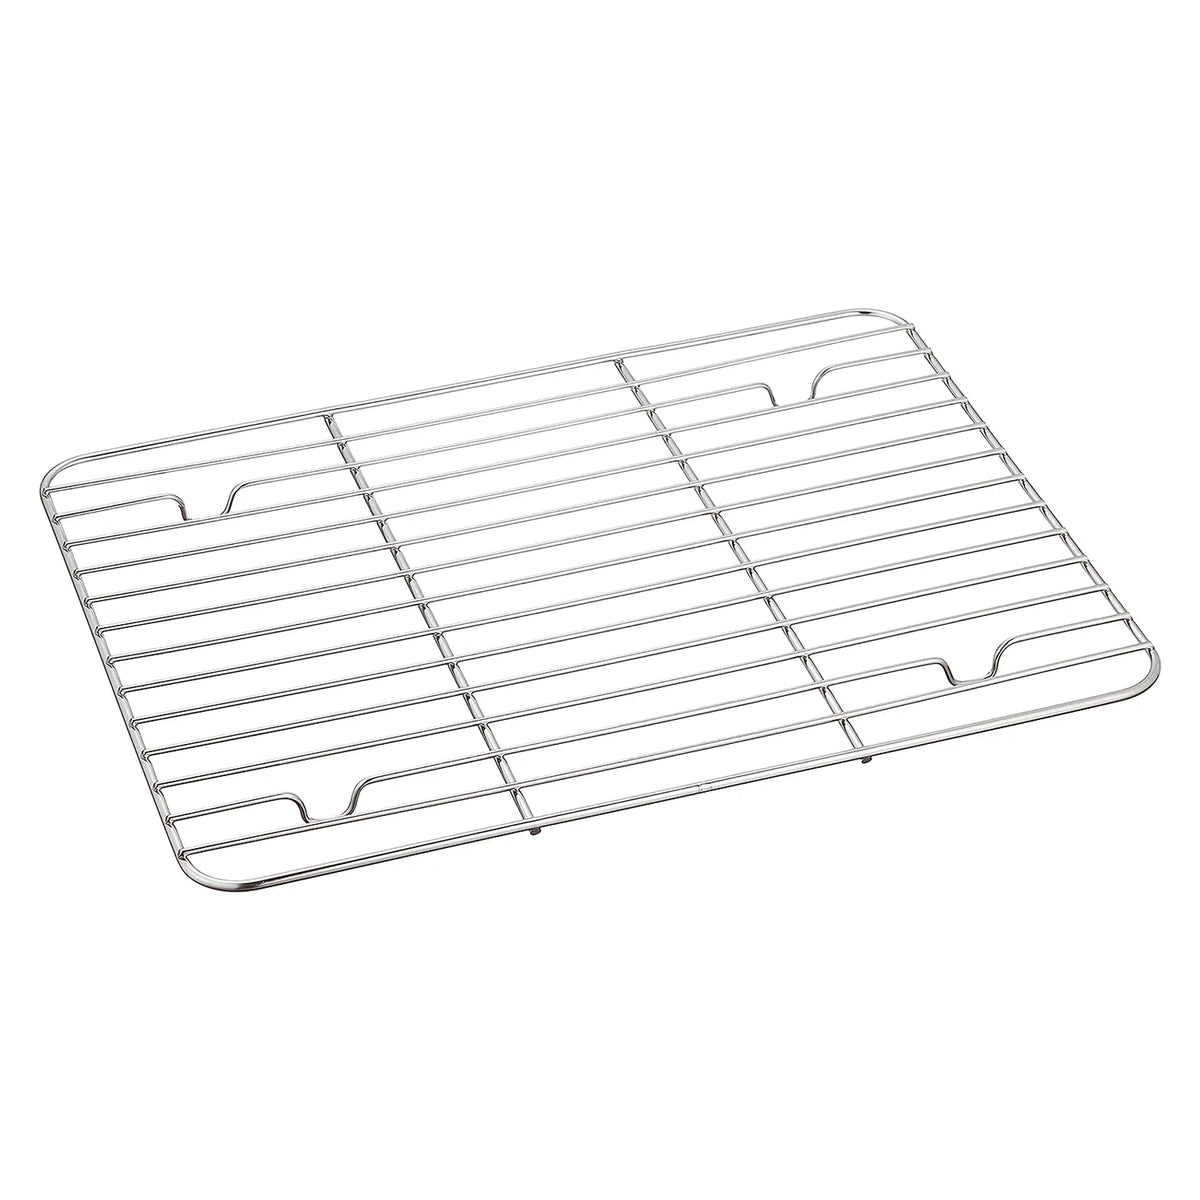 SHINDO Stainless Steel Cooling Rack